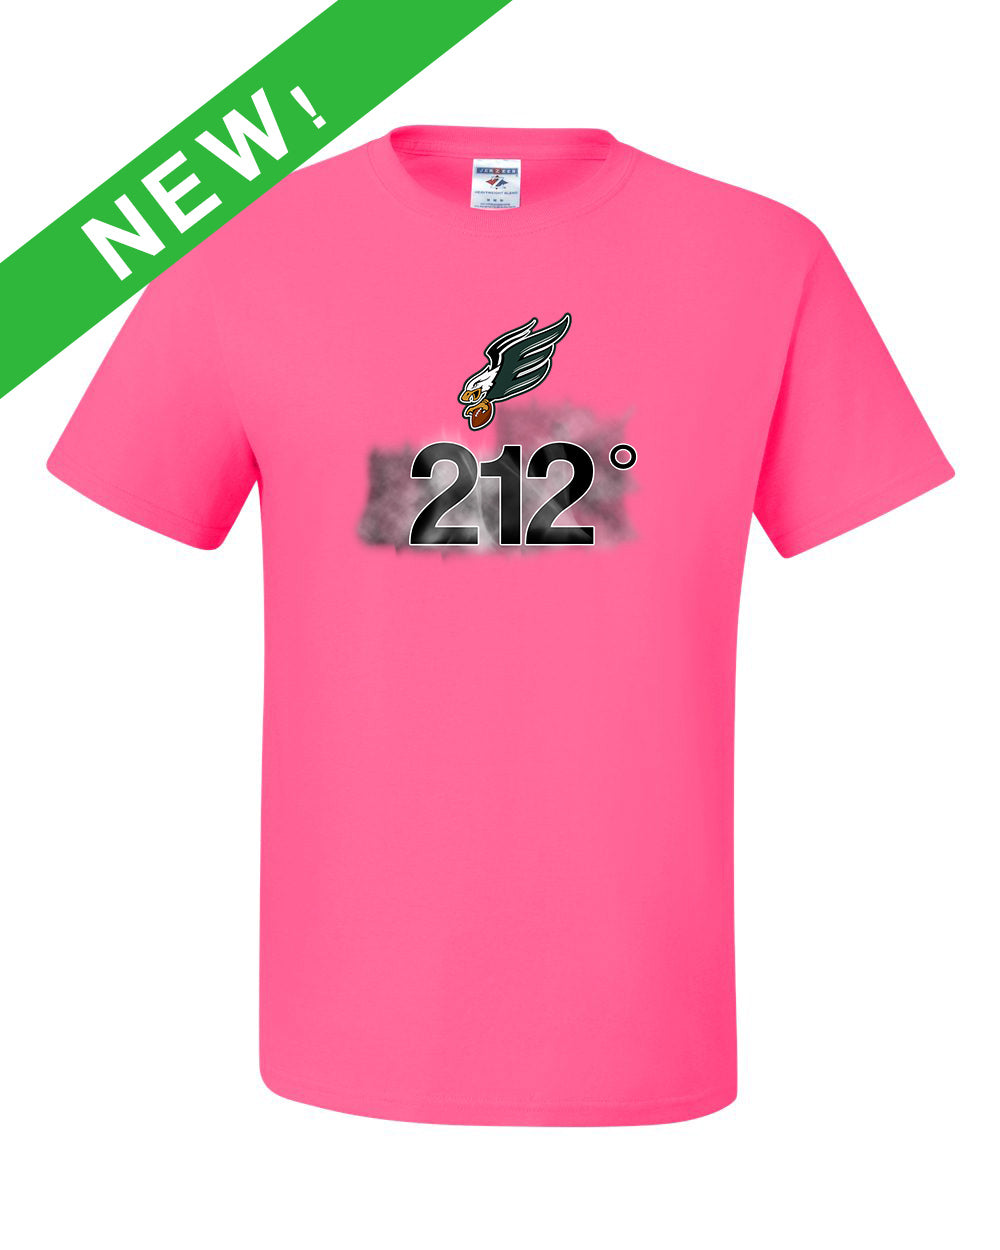 Enfield Eagles Football Adult T-Shirt 50/50 Blend "212" - 29MR (color options available)